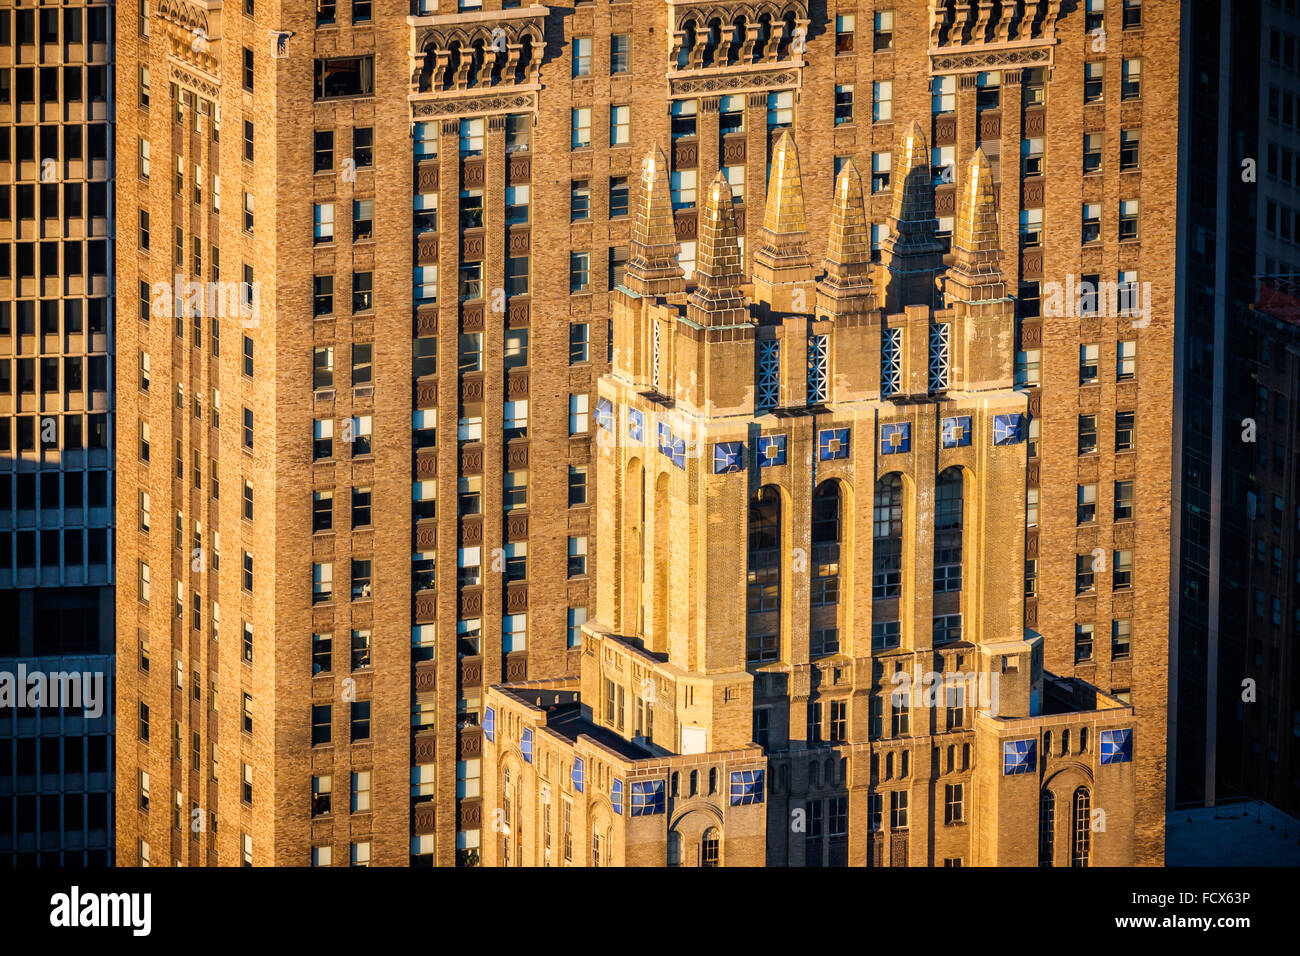 Afternoon light illuminating the facades and architectural details of art deco skyscrapers in Midtown Manhattan. New York City Stock Photo